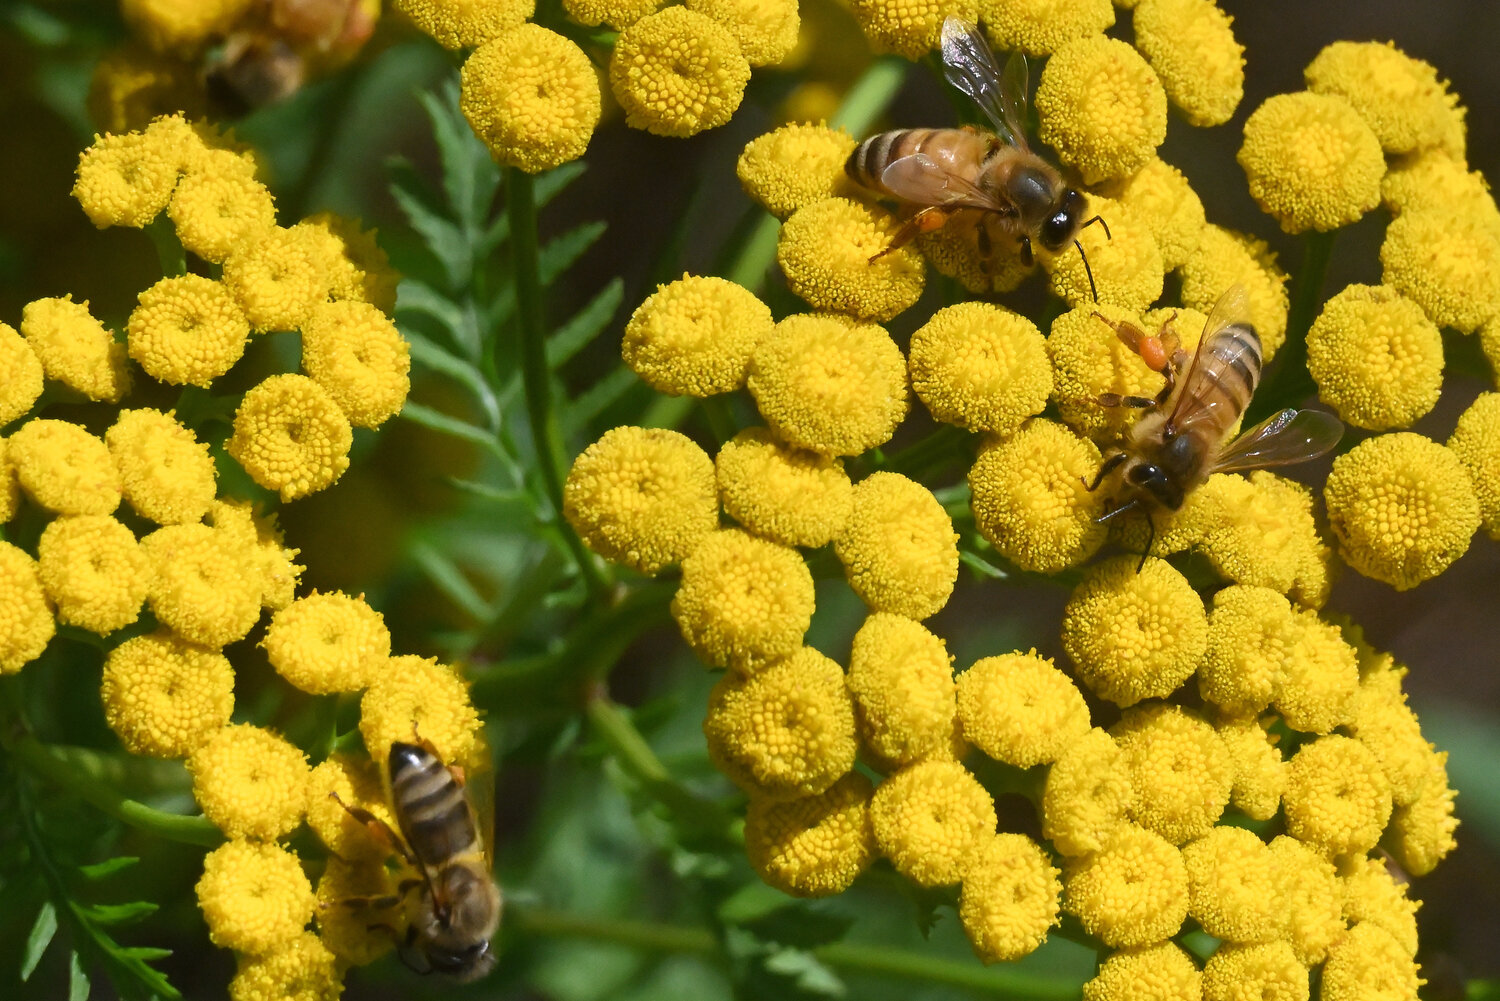 These honeybees were attracted to a small patch of yellow flowers. The plant turned out to be common tansy (Tanacetum vulgare L.). It is also considered invasive, having been brought over from Europe during the 1600s as an ornamental plant. ..One thing to say on its behalf, though, is that there were at least a dozen honeybees on flowers in this small patch of common tansy.